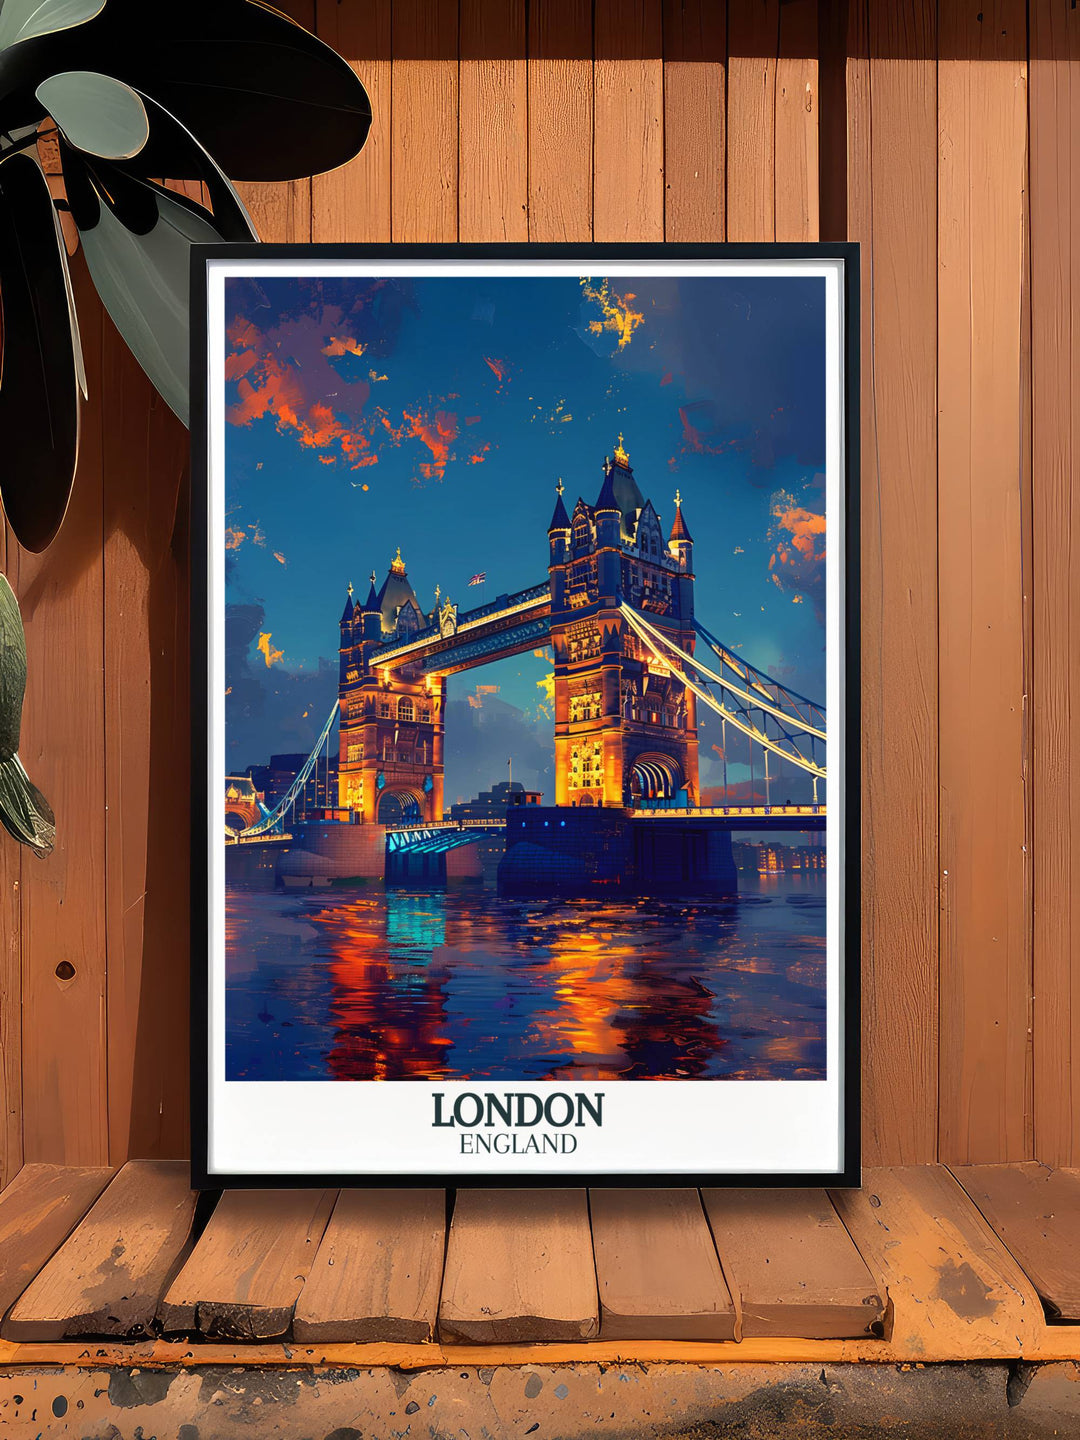 England prints series, featuring diverse landscapes from urban London to the rural outskirts, catering to all tastes.